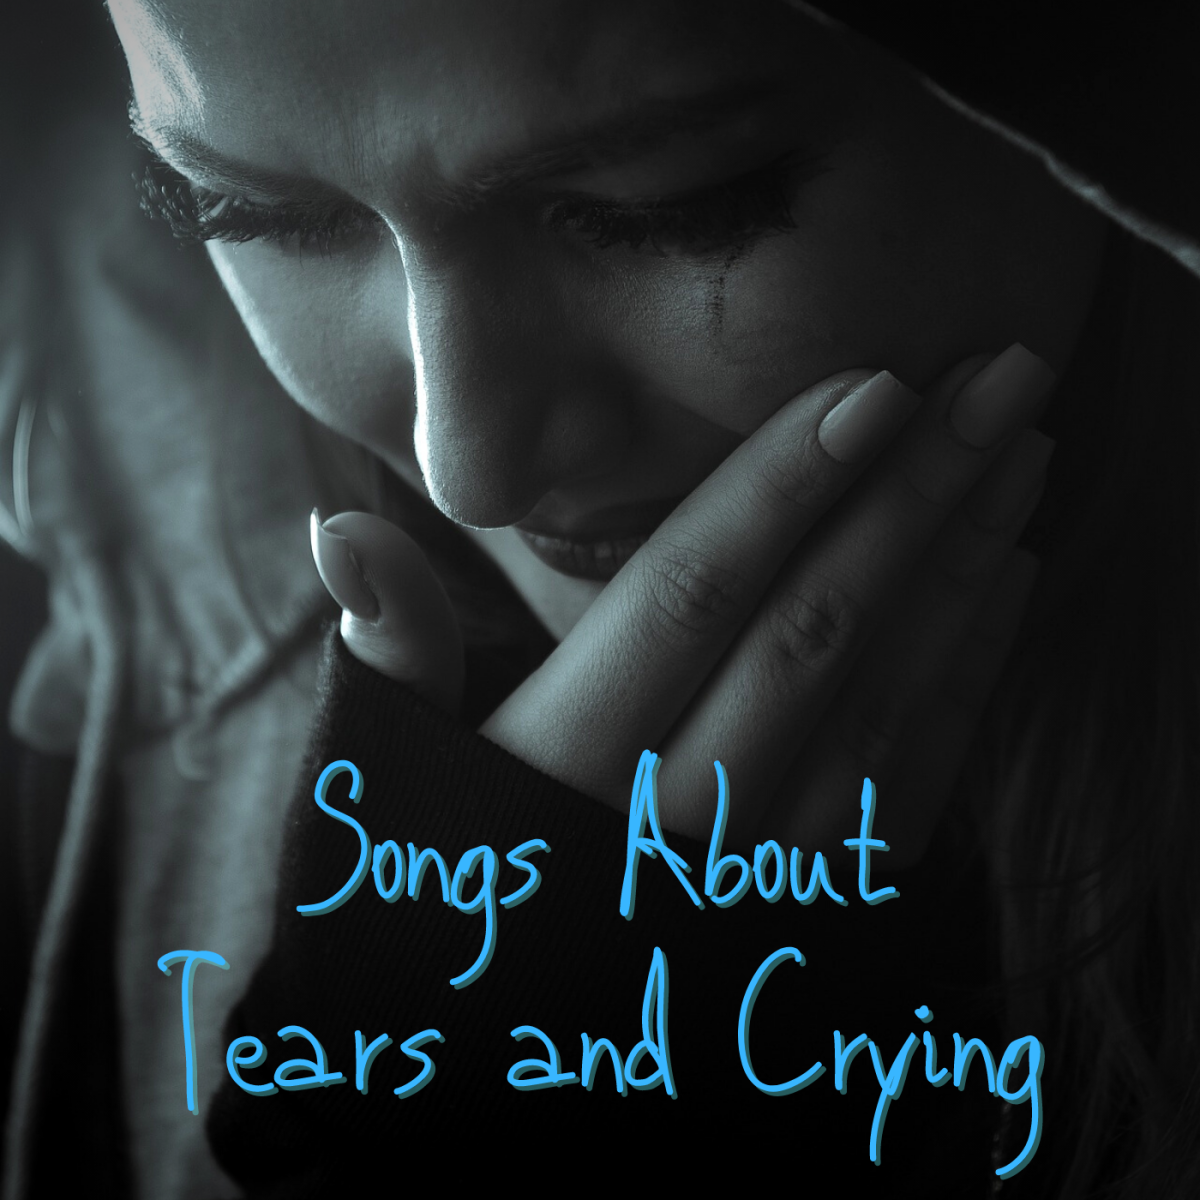 88 Songs About Crying and Tears - Spinditty